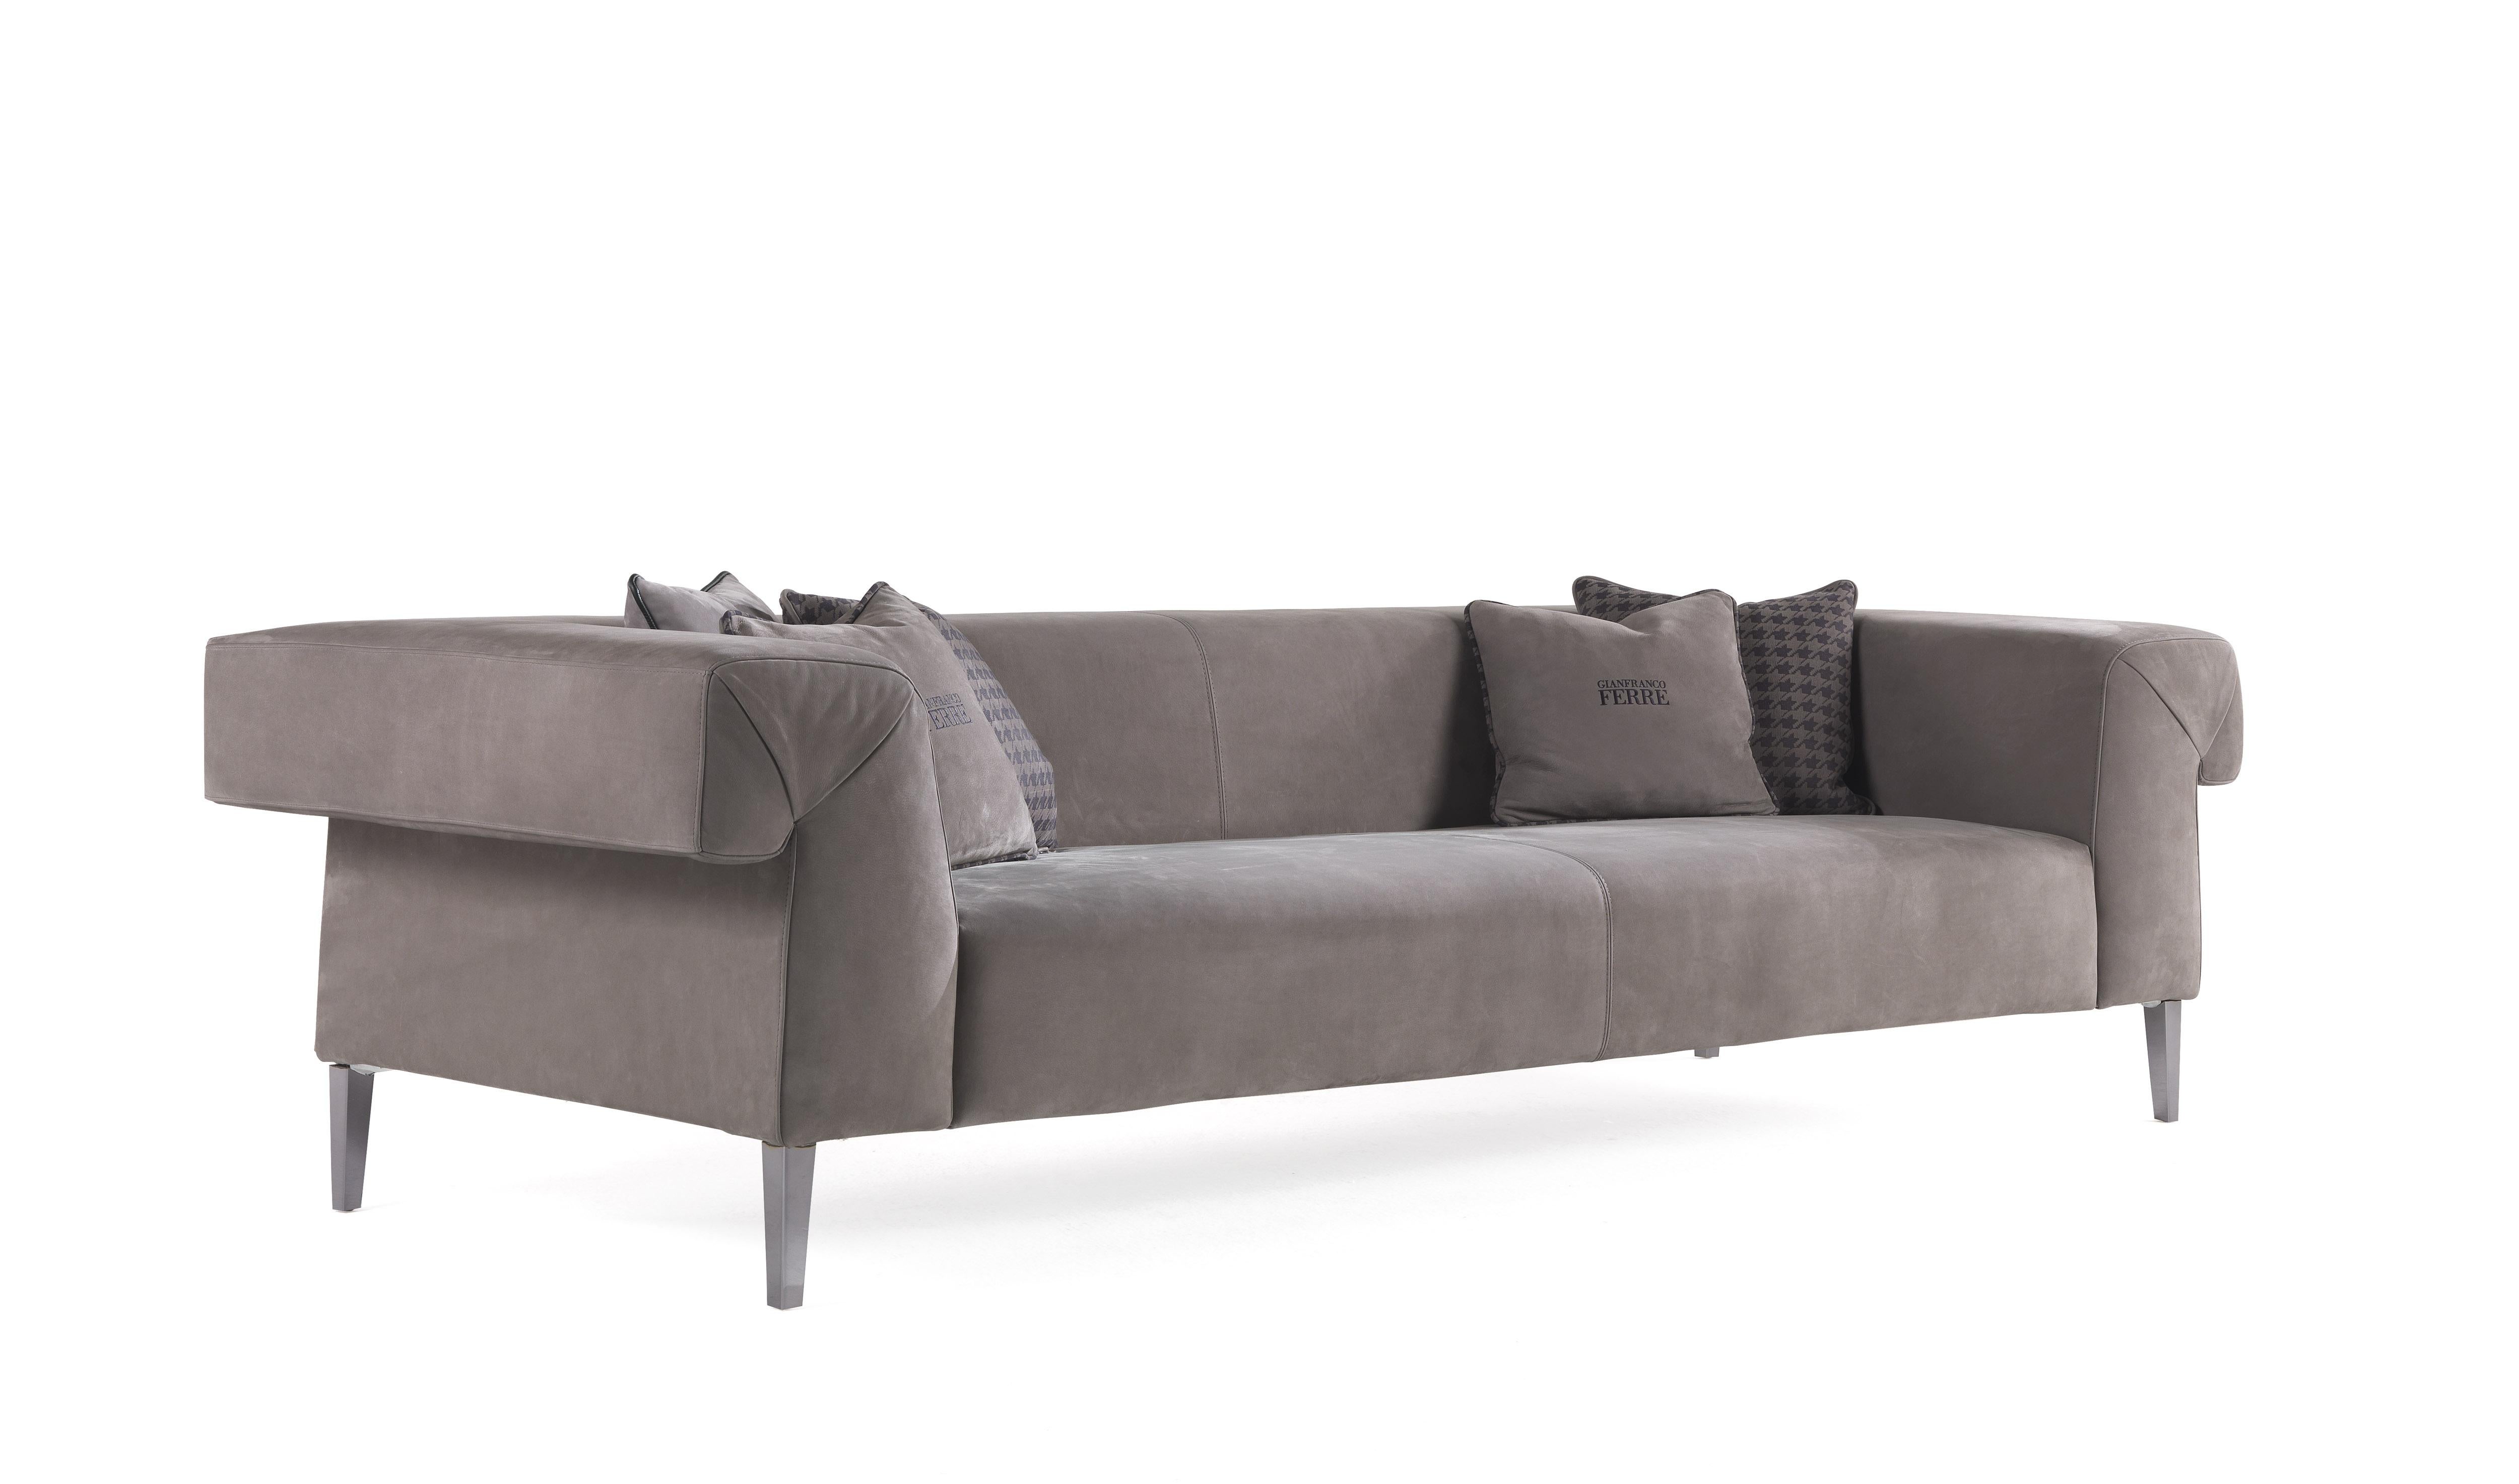 Elegance and sobriety meet the urban soul of the Gianfranco Ferré Home 2019 collection in the Soho sofa, thanks to the combination of the soft leather upholstery and the black chrome finish of the feet.
Soho 3-seater sofa with structure in beech